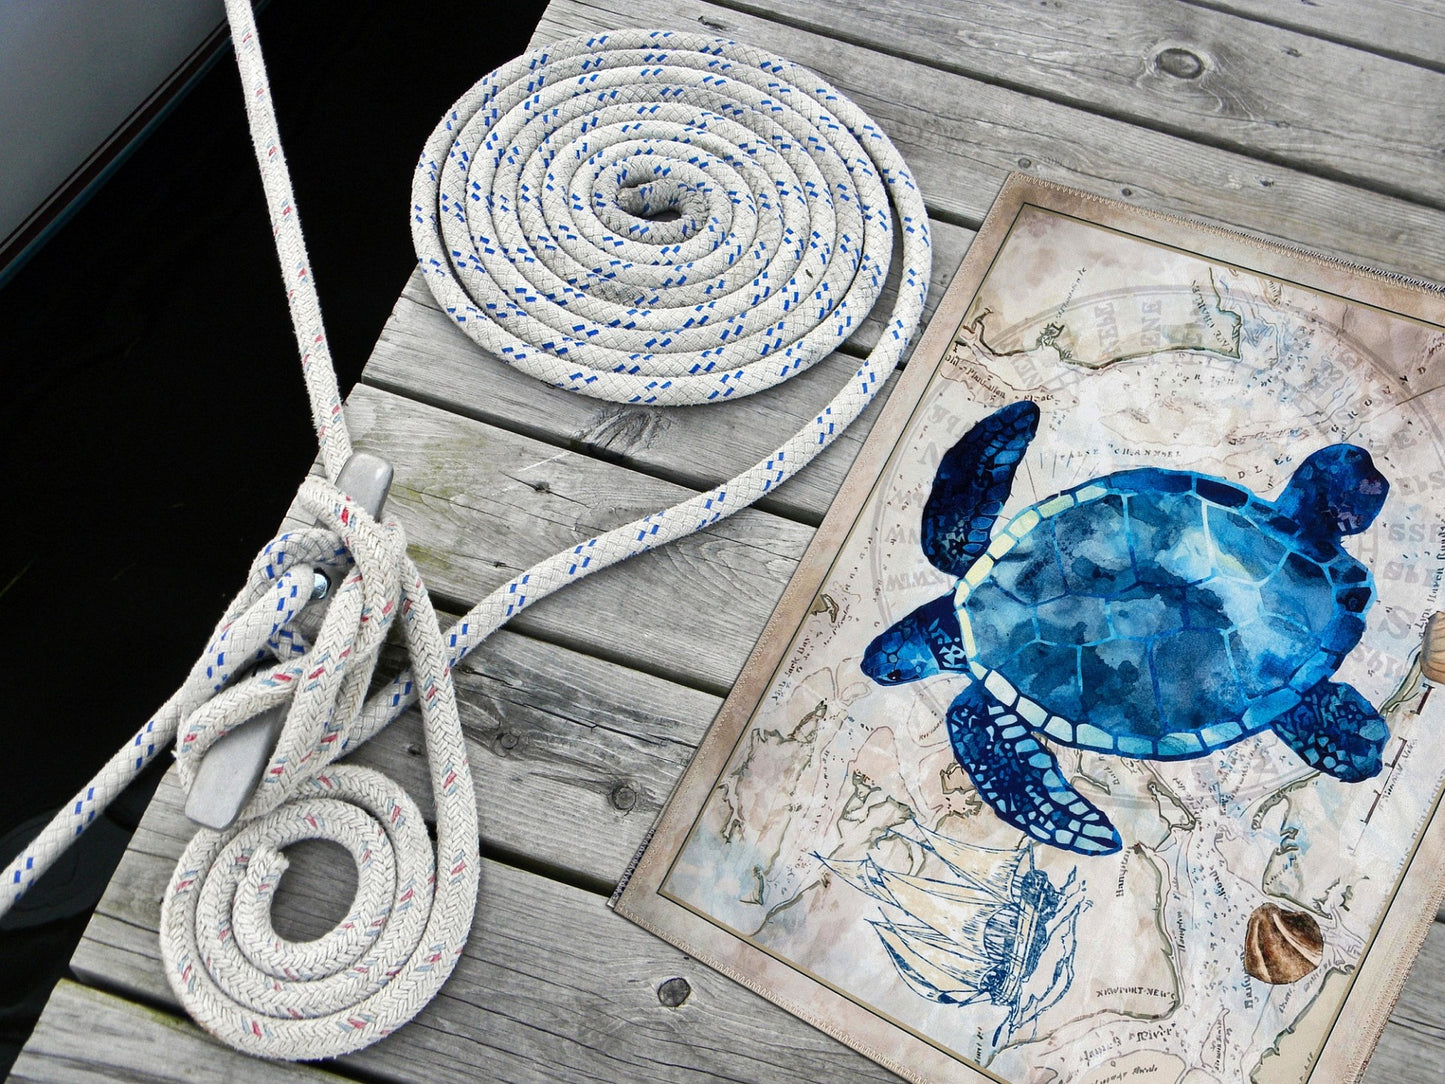 Seafaring Turtles Olivia's Home Accent Washable Rug 22" x 32"